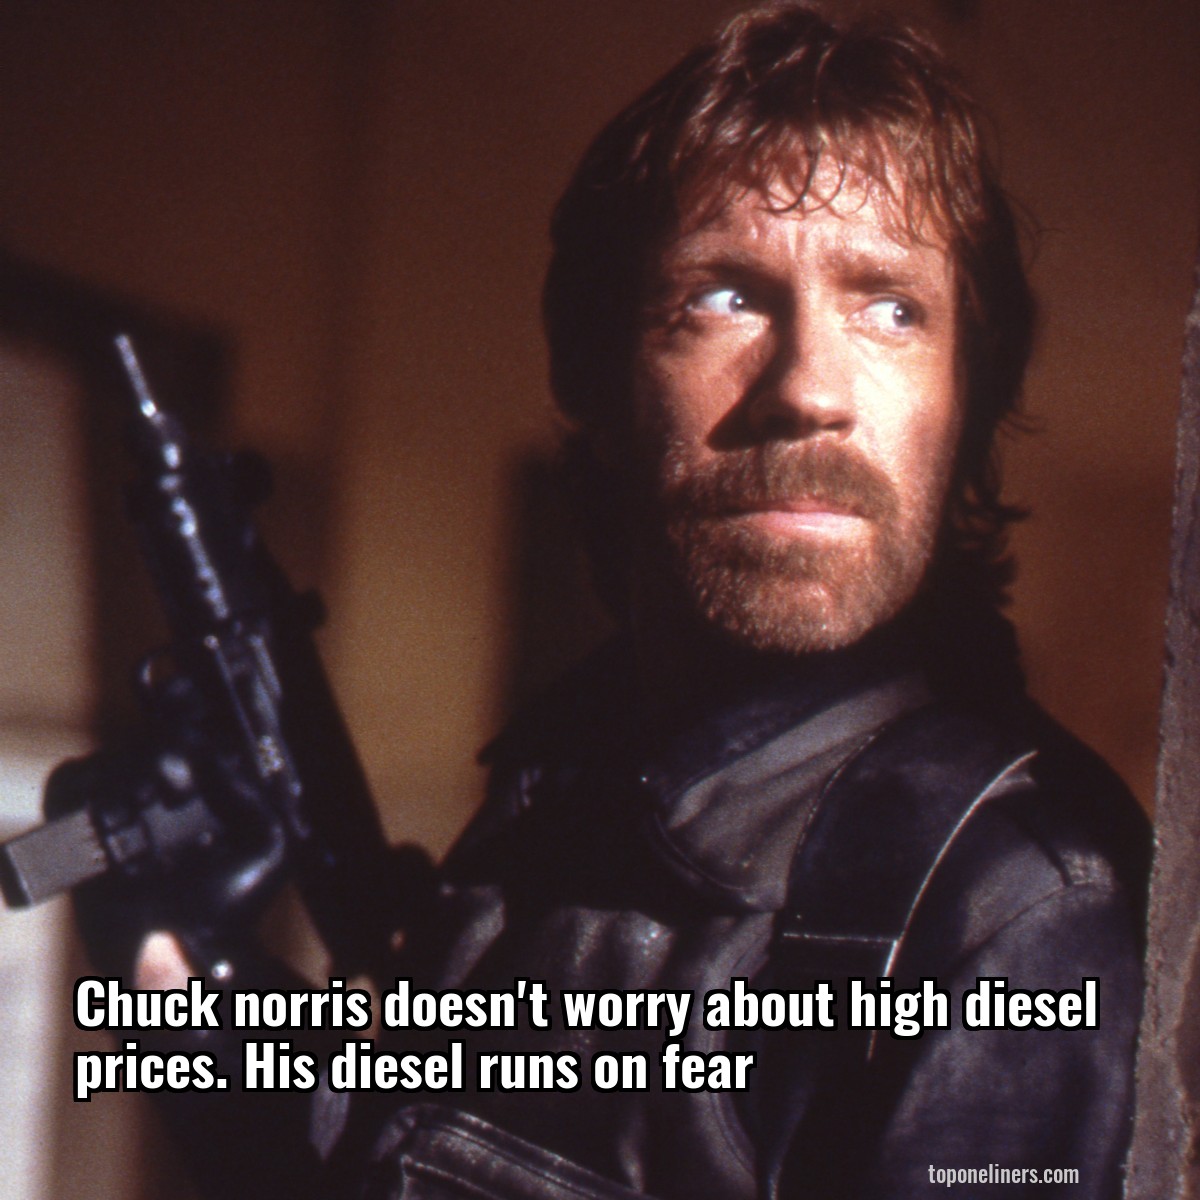 Chuck norris doesn't worry about high diesel prices. His diesel runs on fear